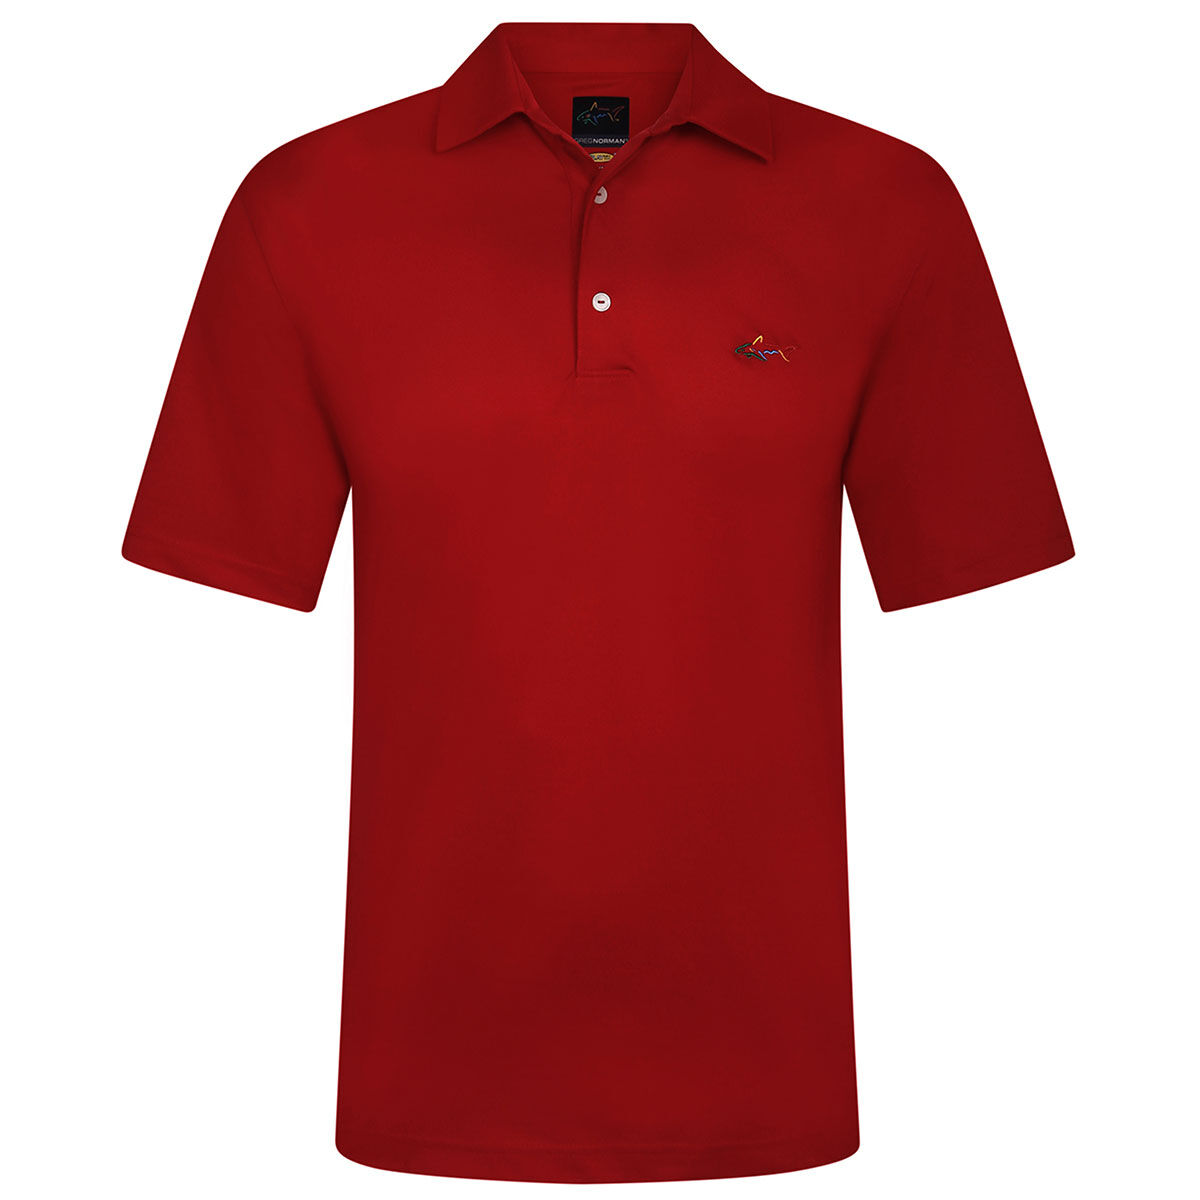 Greg Norman Red Embroidered Shark Logo Golf Polo Shirt, Mens | American Golf, Size: Large